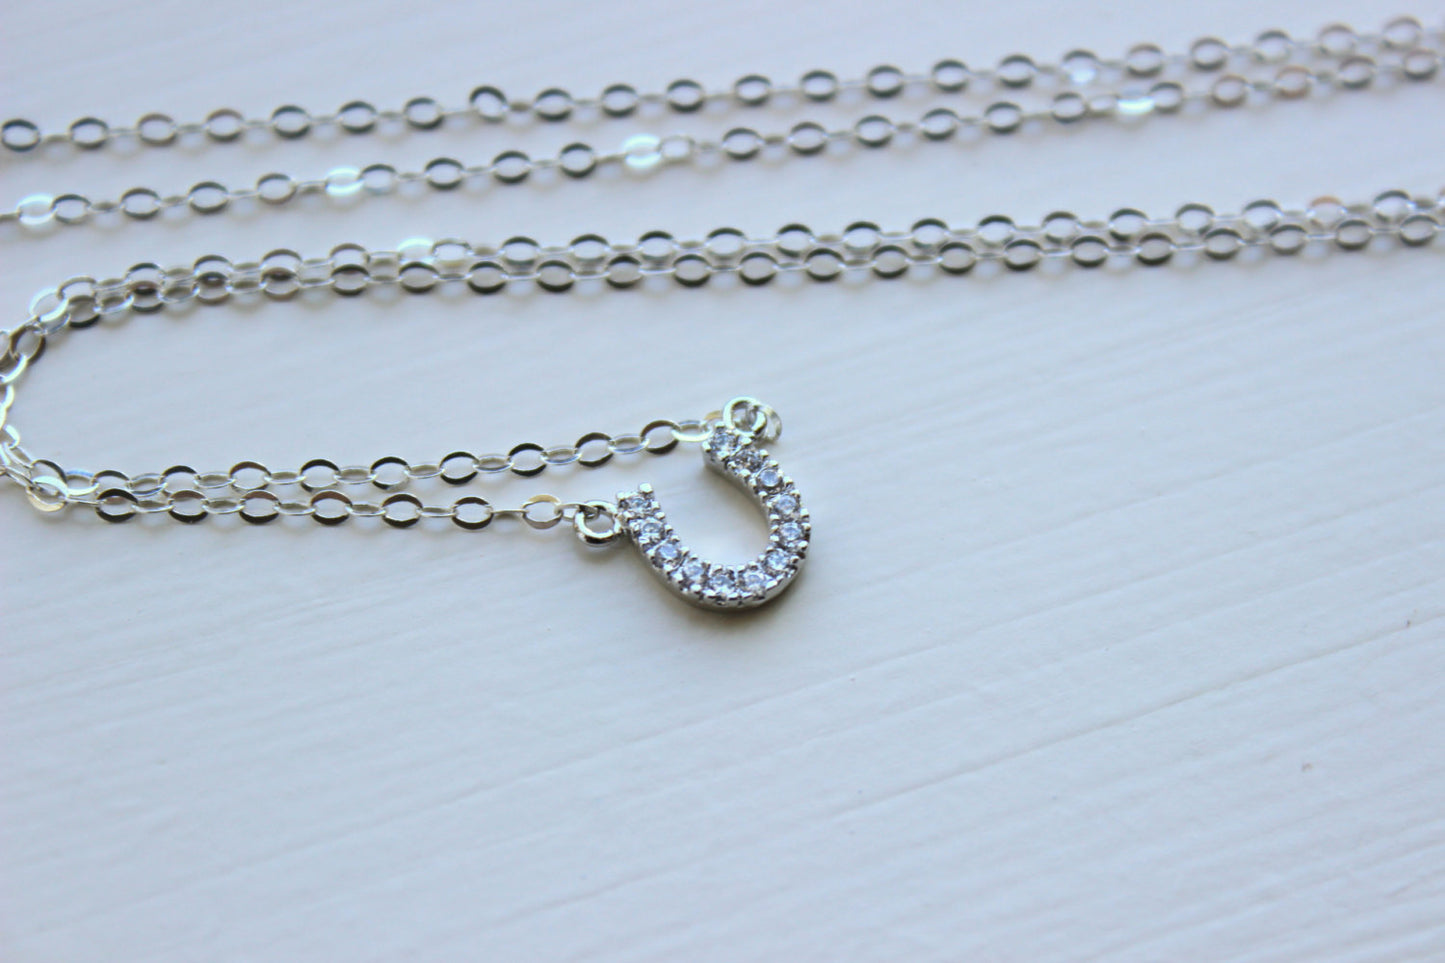 Silver Horseshoe Necklace CZ Crystal Horse Shoe Jewelry - Simple Charm Necklace - Charm Jewelry - Will you be my bridesmaid gift under 25